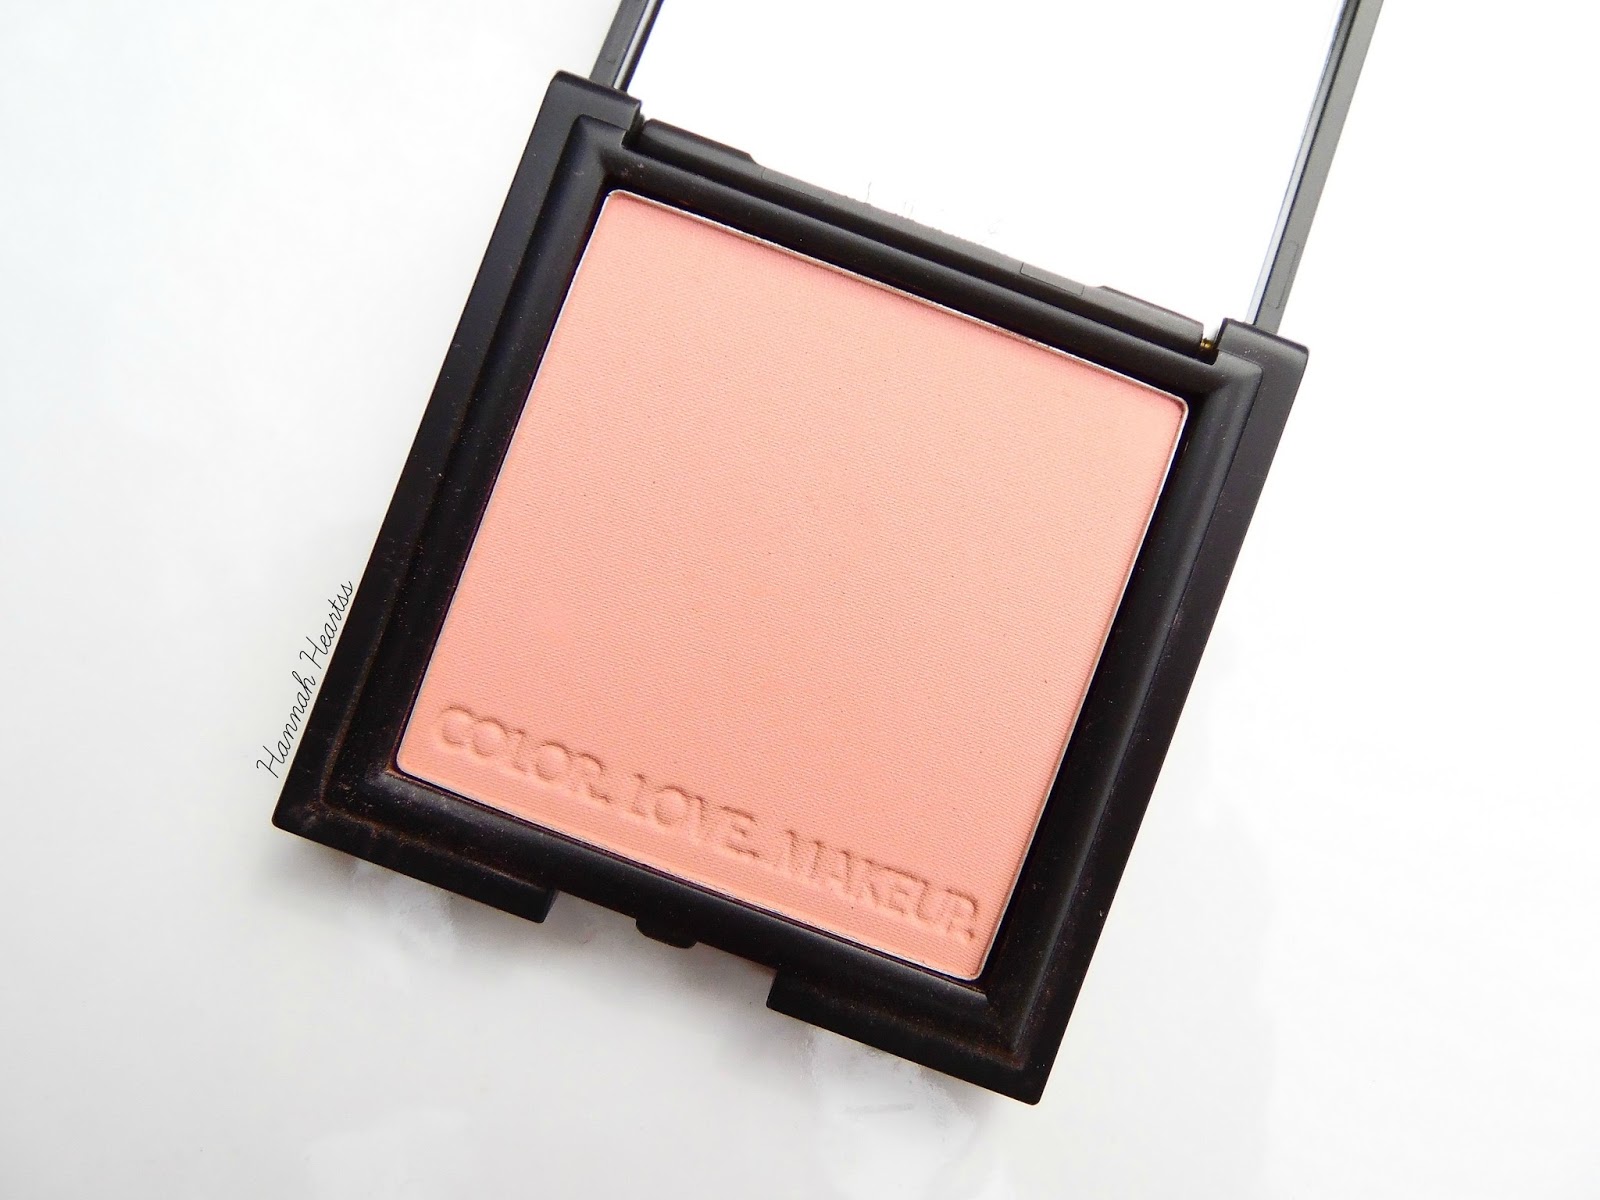 Zoeva Luxe Color Blush in Shy Beauty 